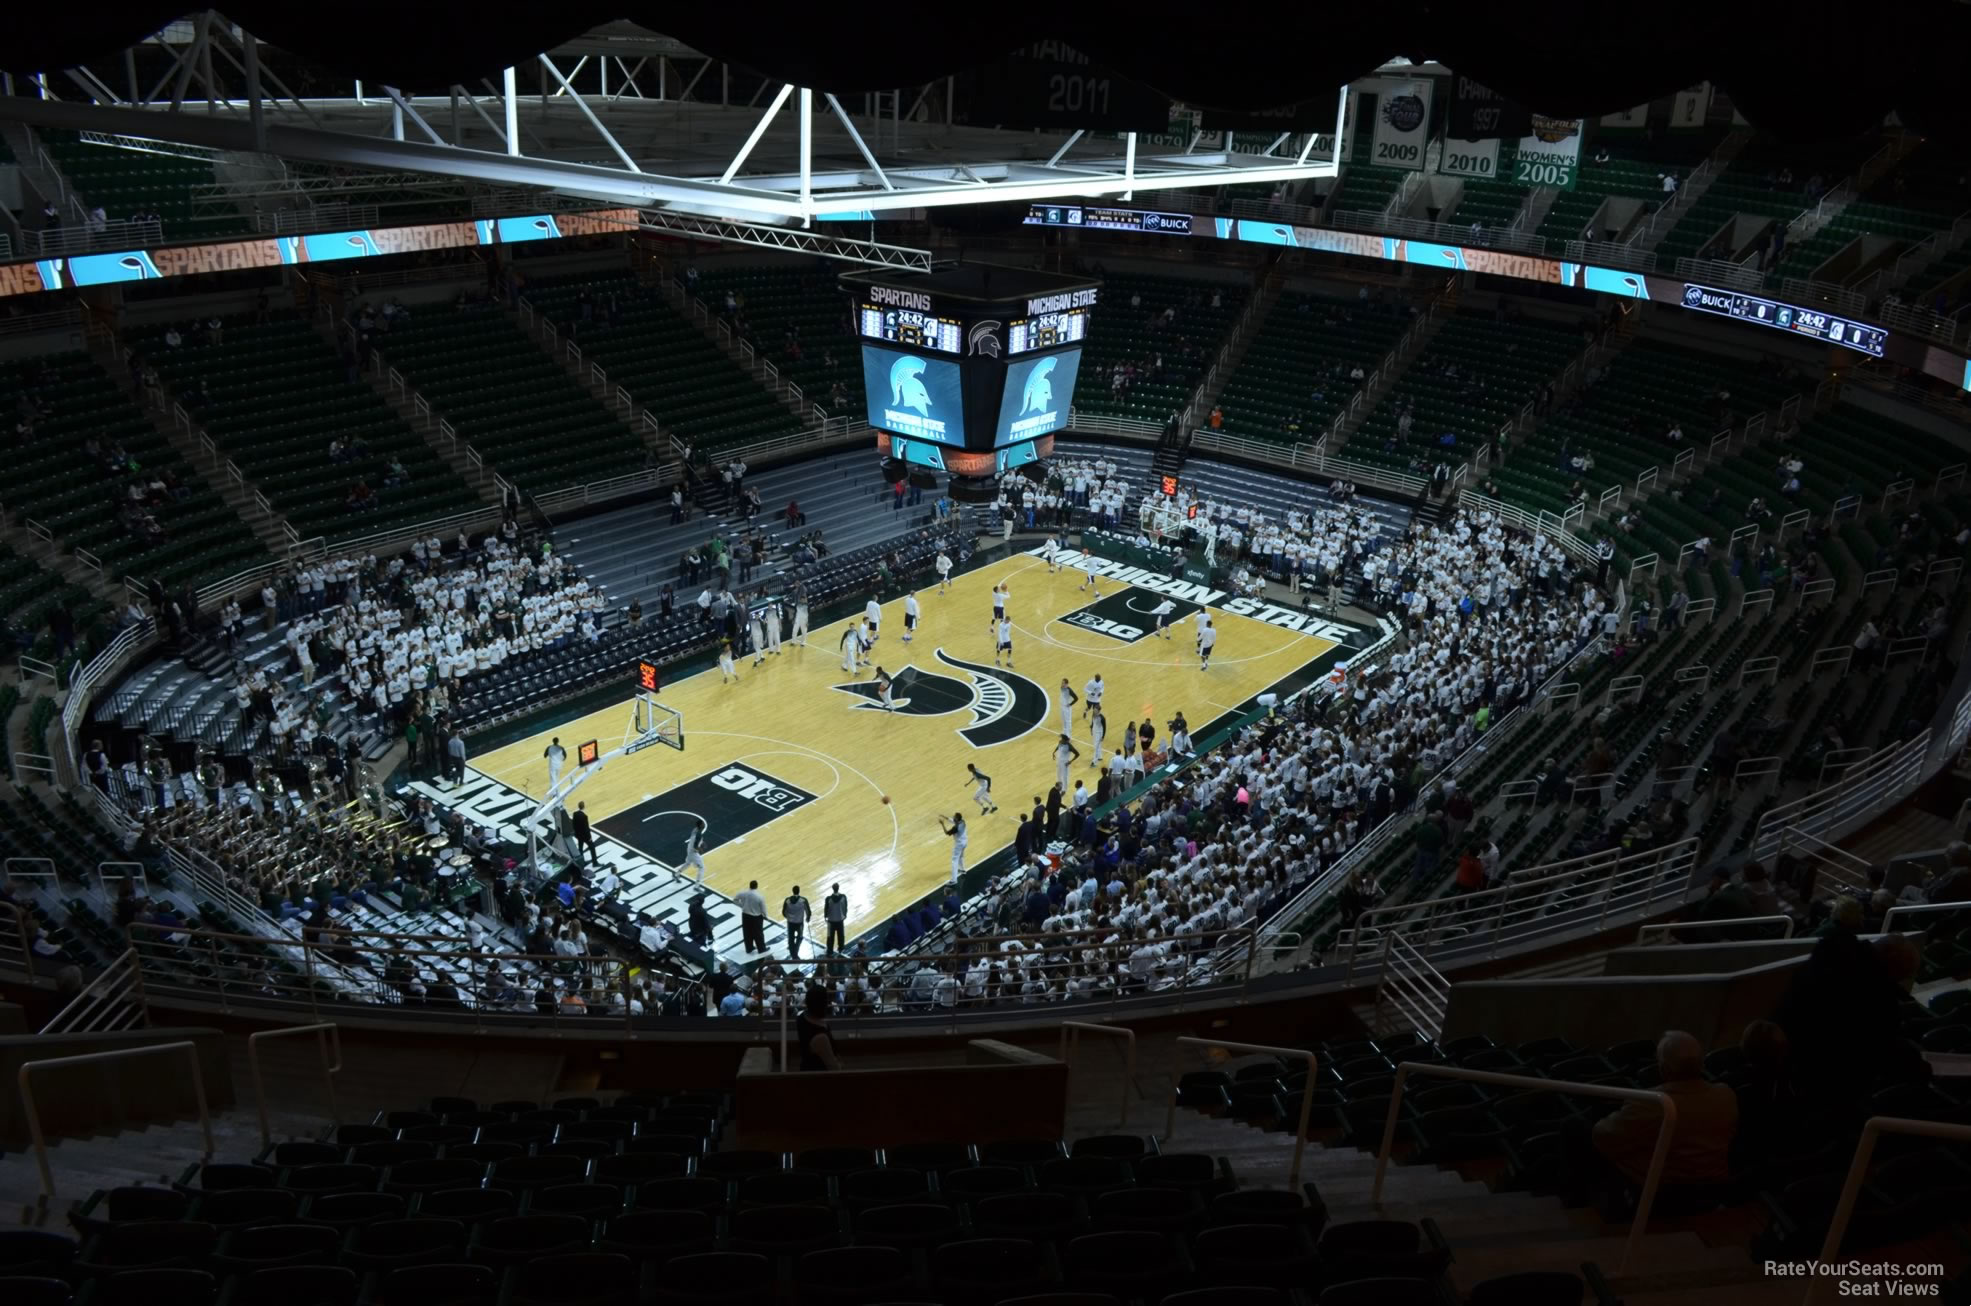 section 214, row 15 seat view  - breslin center